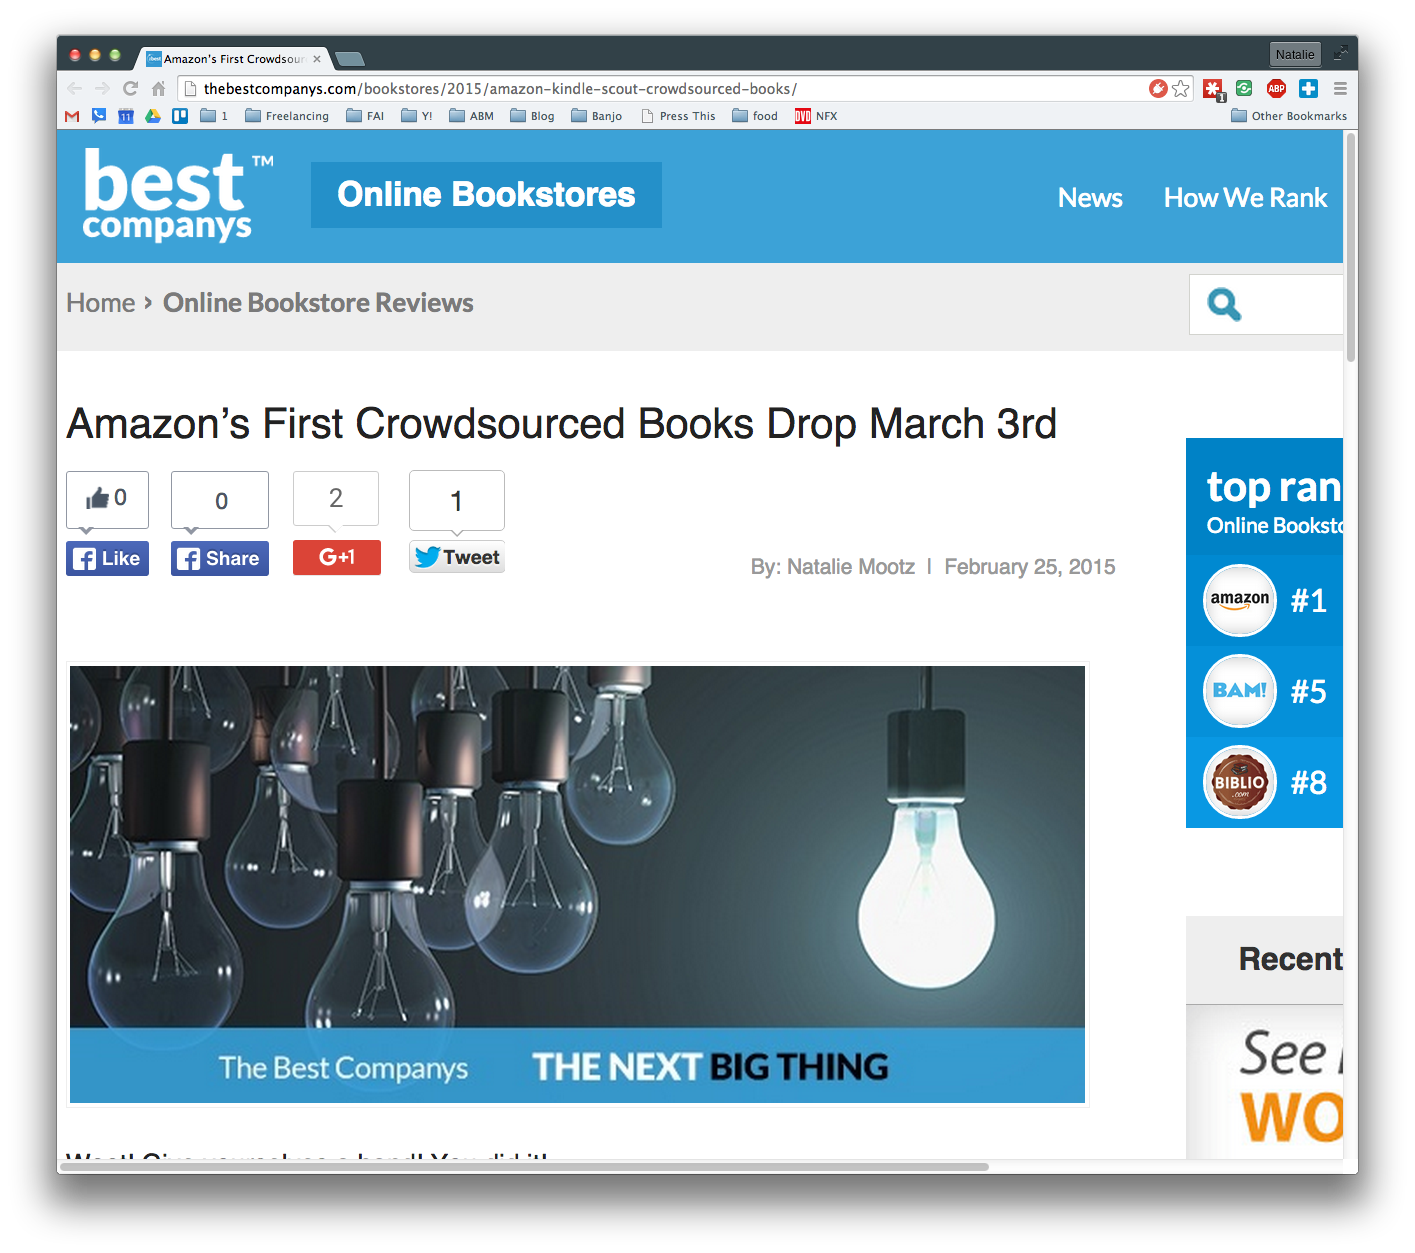 Amazon’s First Crowdsourced Books Drop March 3rd